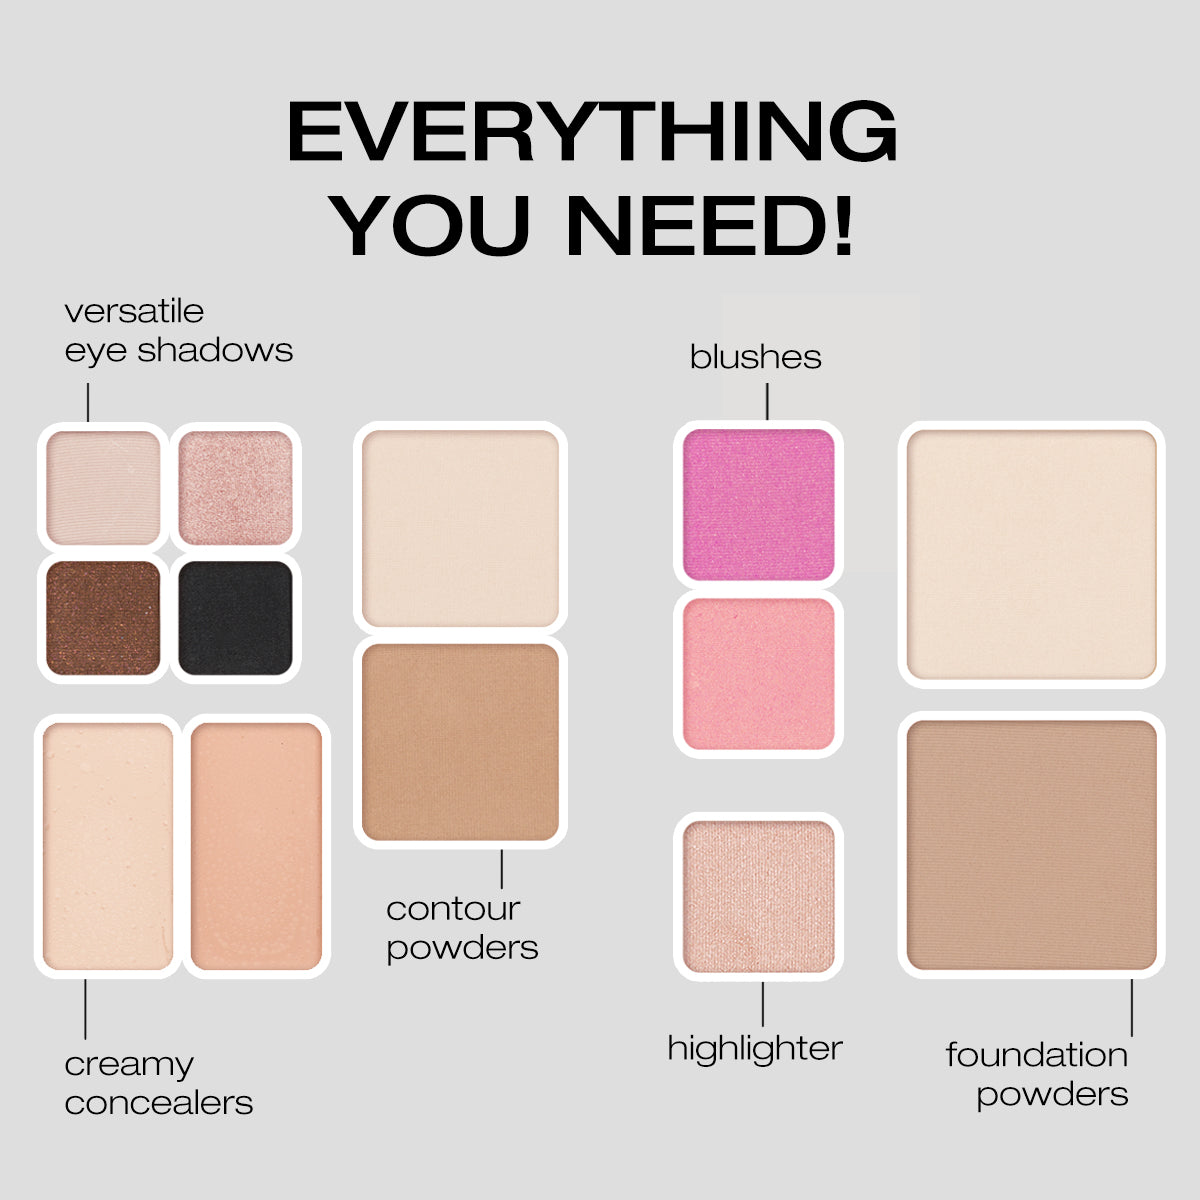 Description of the versatile eye shadows, blushes, contour powders, creamy concealers, highlighter, blushes, and foundation powders described as everything you need #color_#1 light